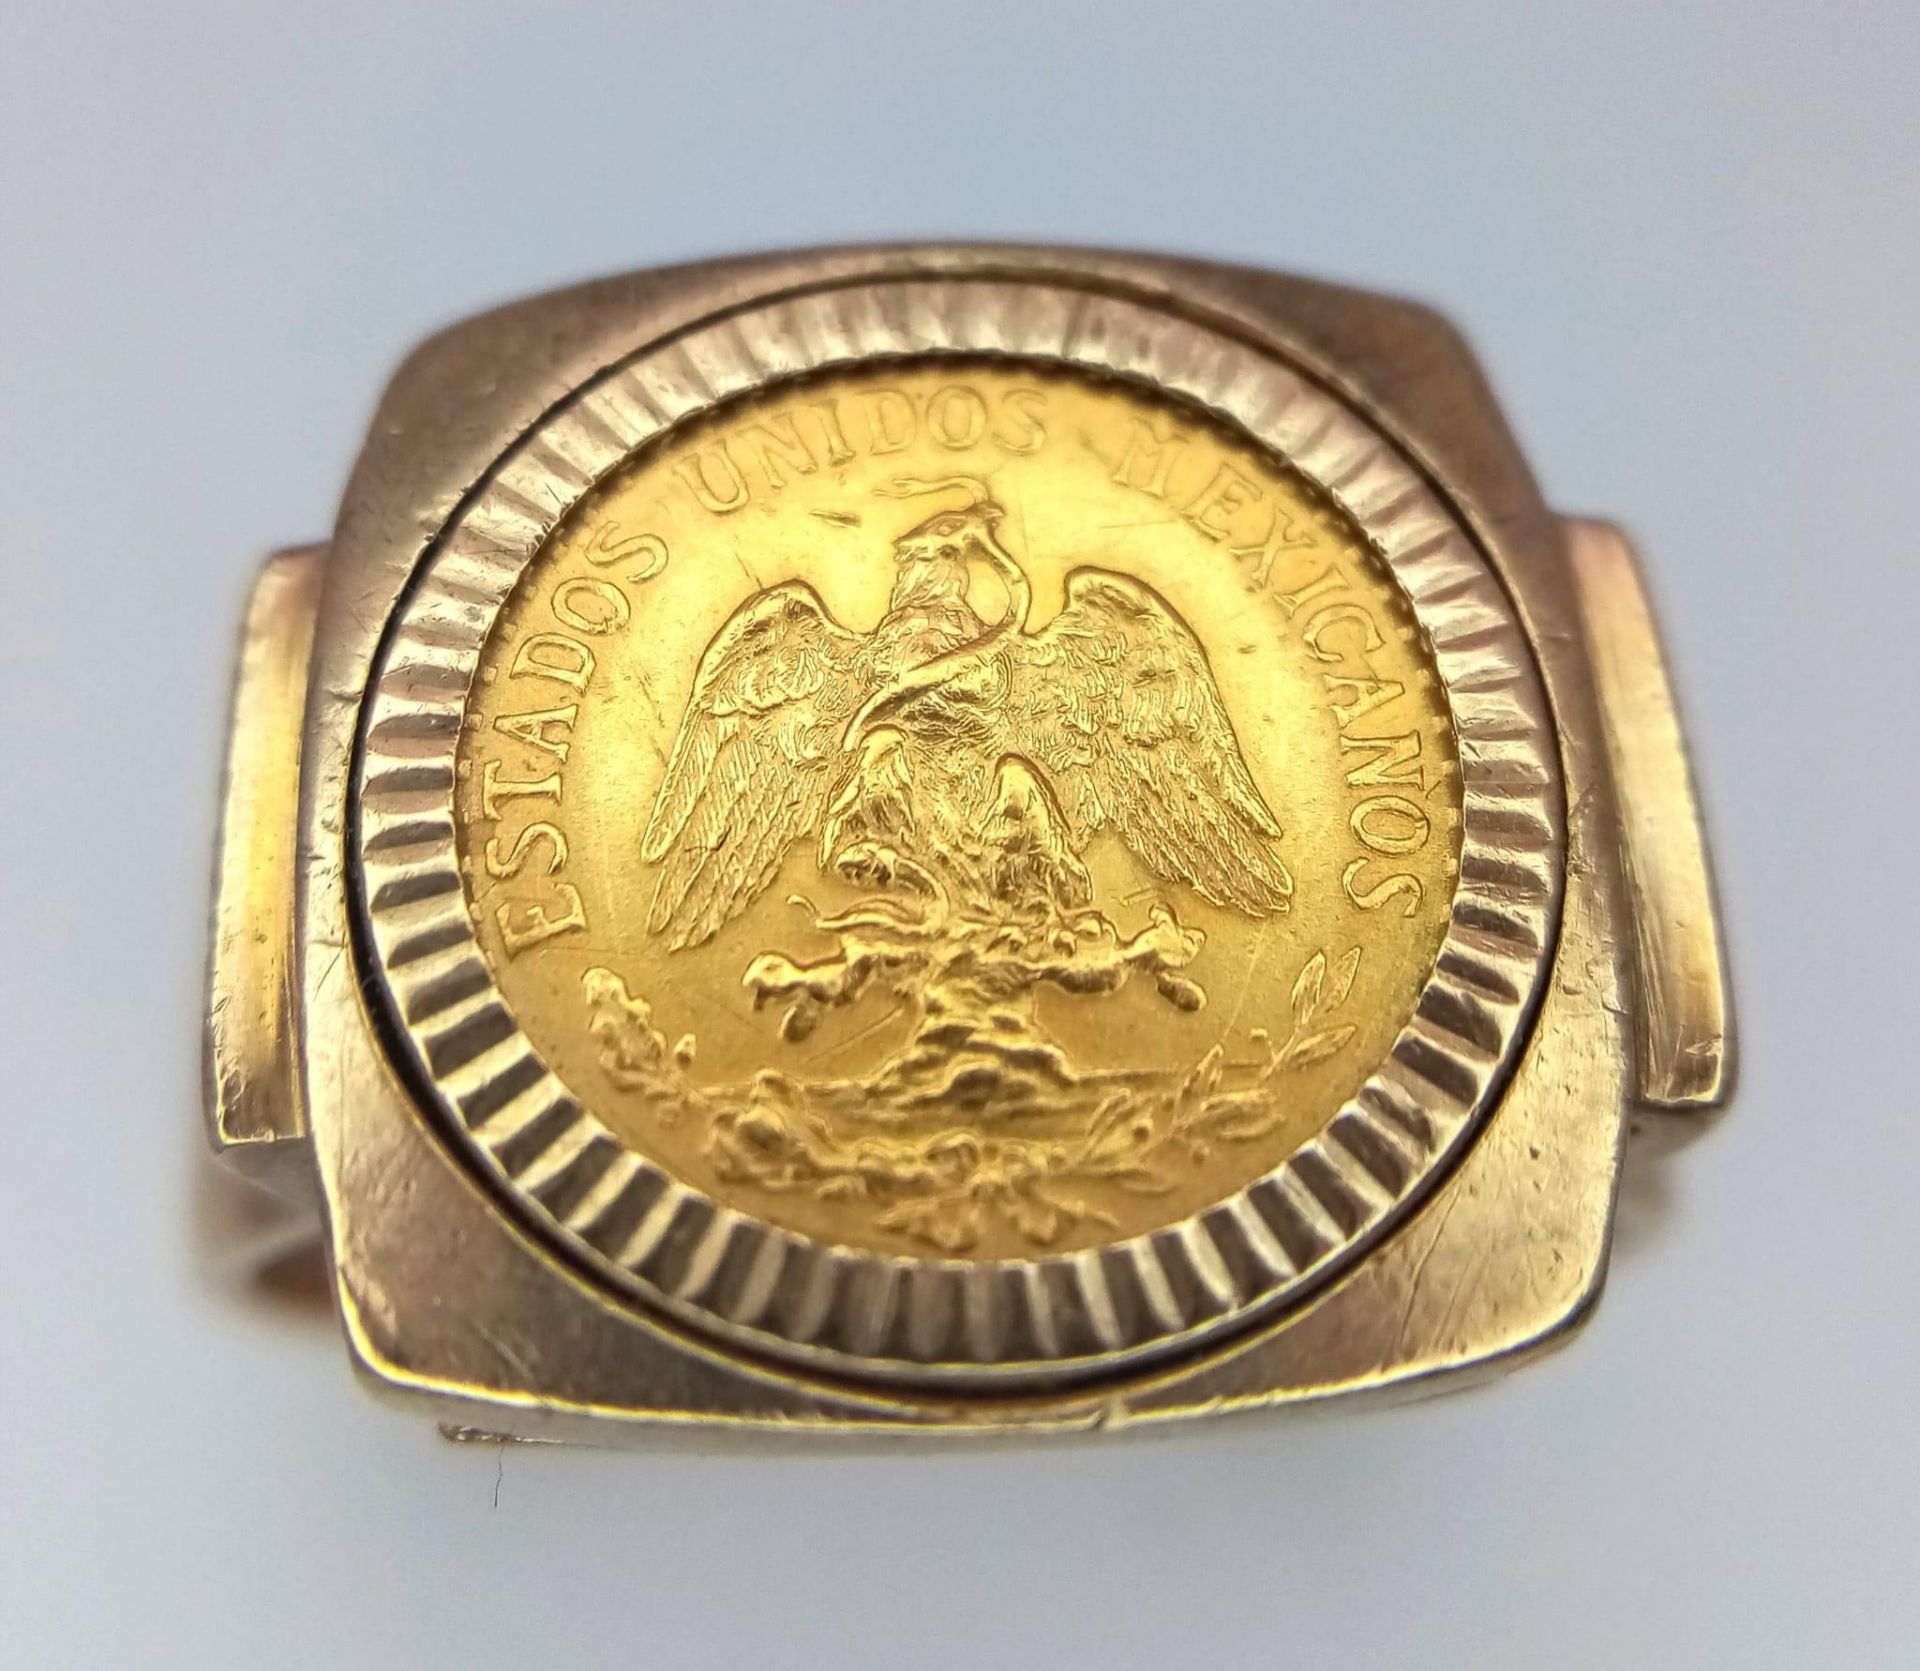 An 18K Gold Dos Pesos Mexican Coin set in a 9K Gold Ring. 6.6g total weight. Size R.